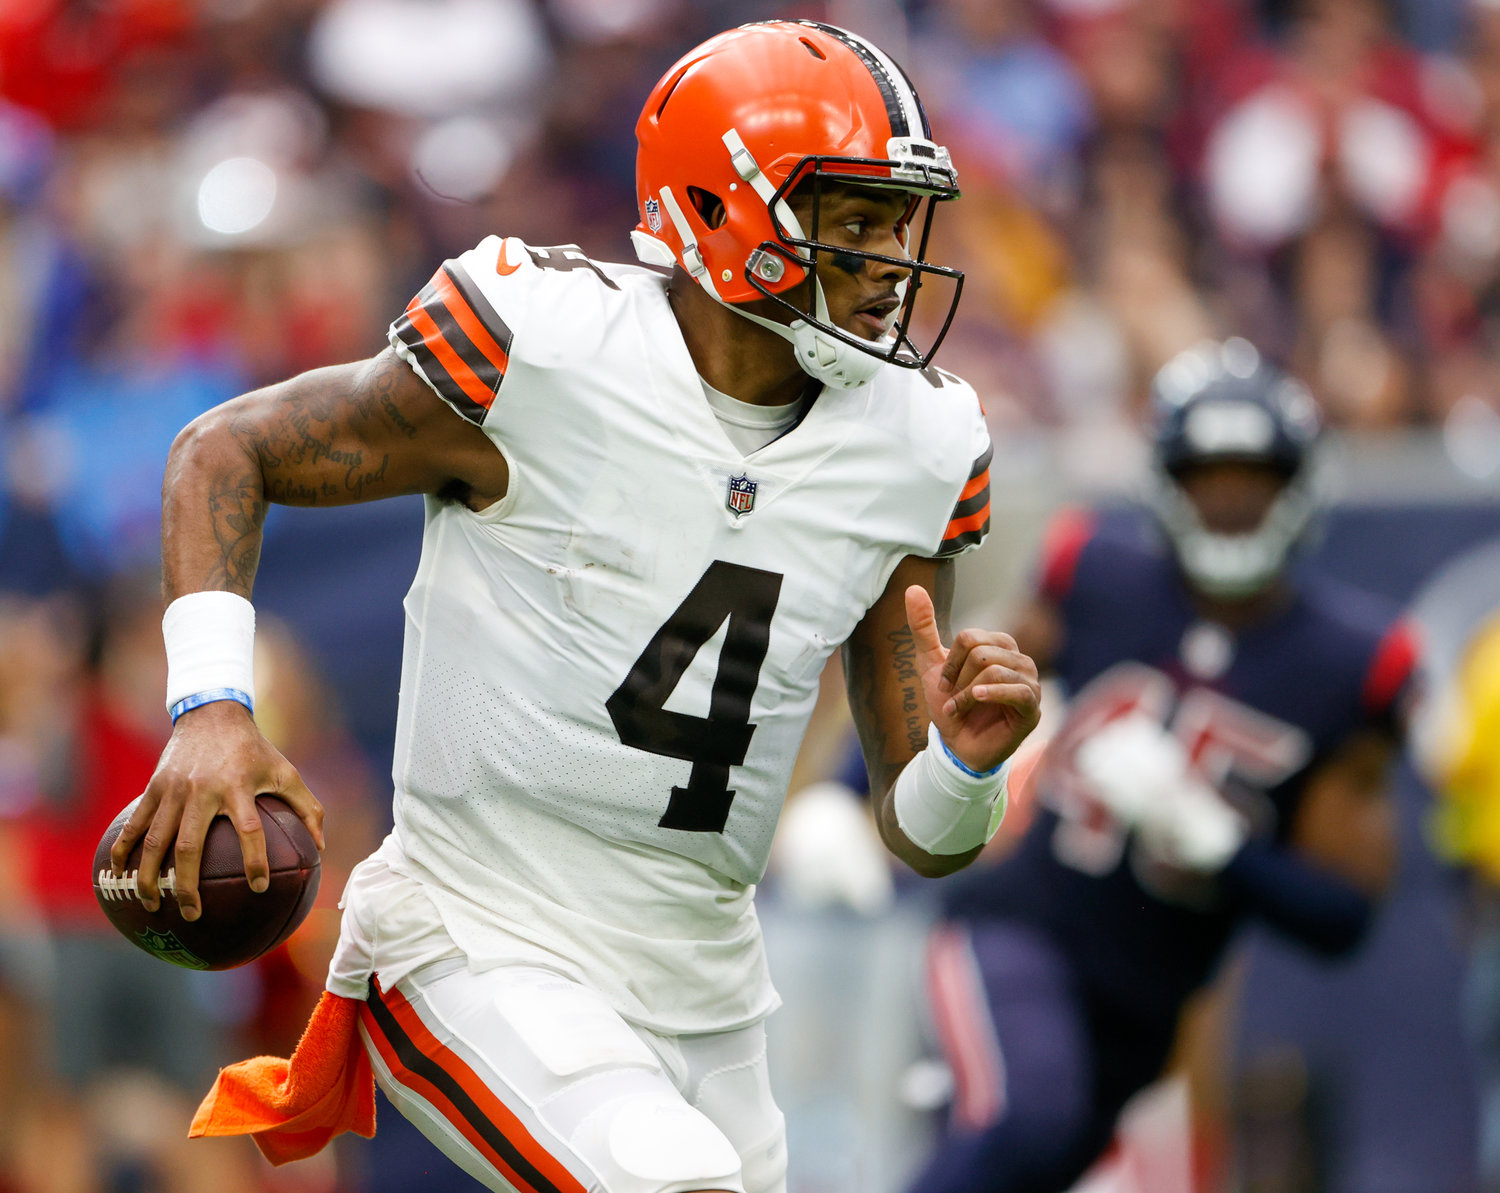 Cleveland Browns quarterback Deshaun Watson (4) scrambles out of the backfield during an NFL game between the Houston Texans and the Cleveland Browns on Dec. 4, 2022, in Houston. The Browns won, 27-14.